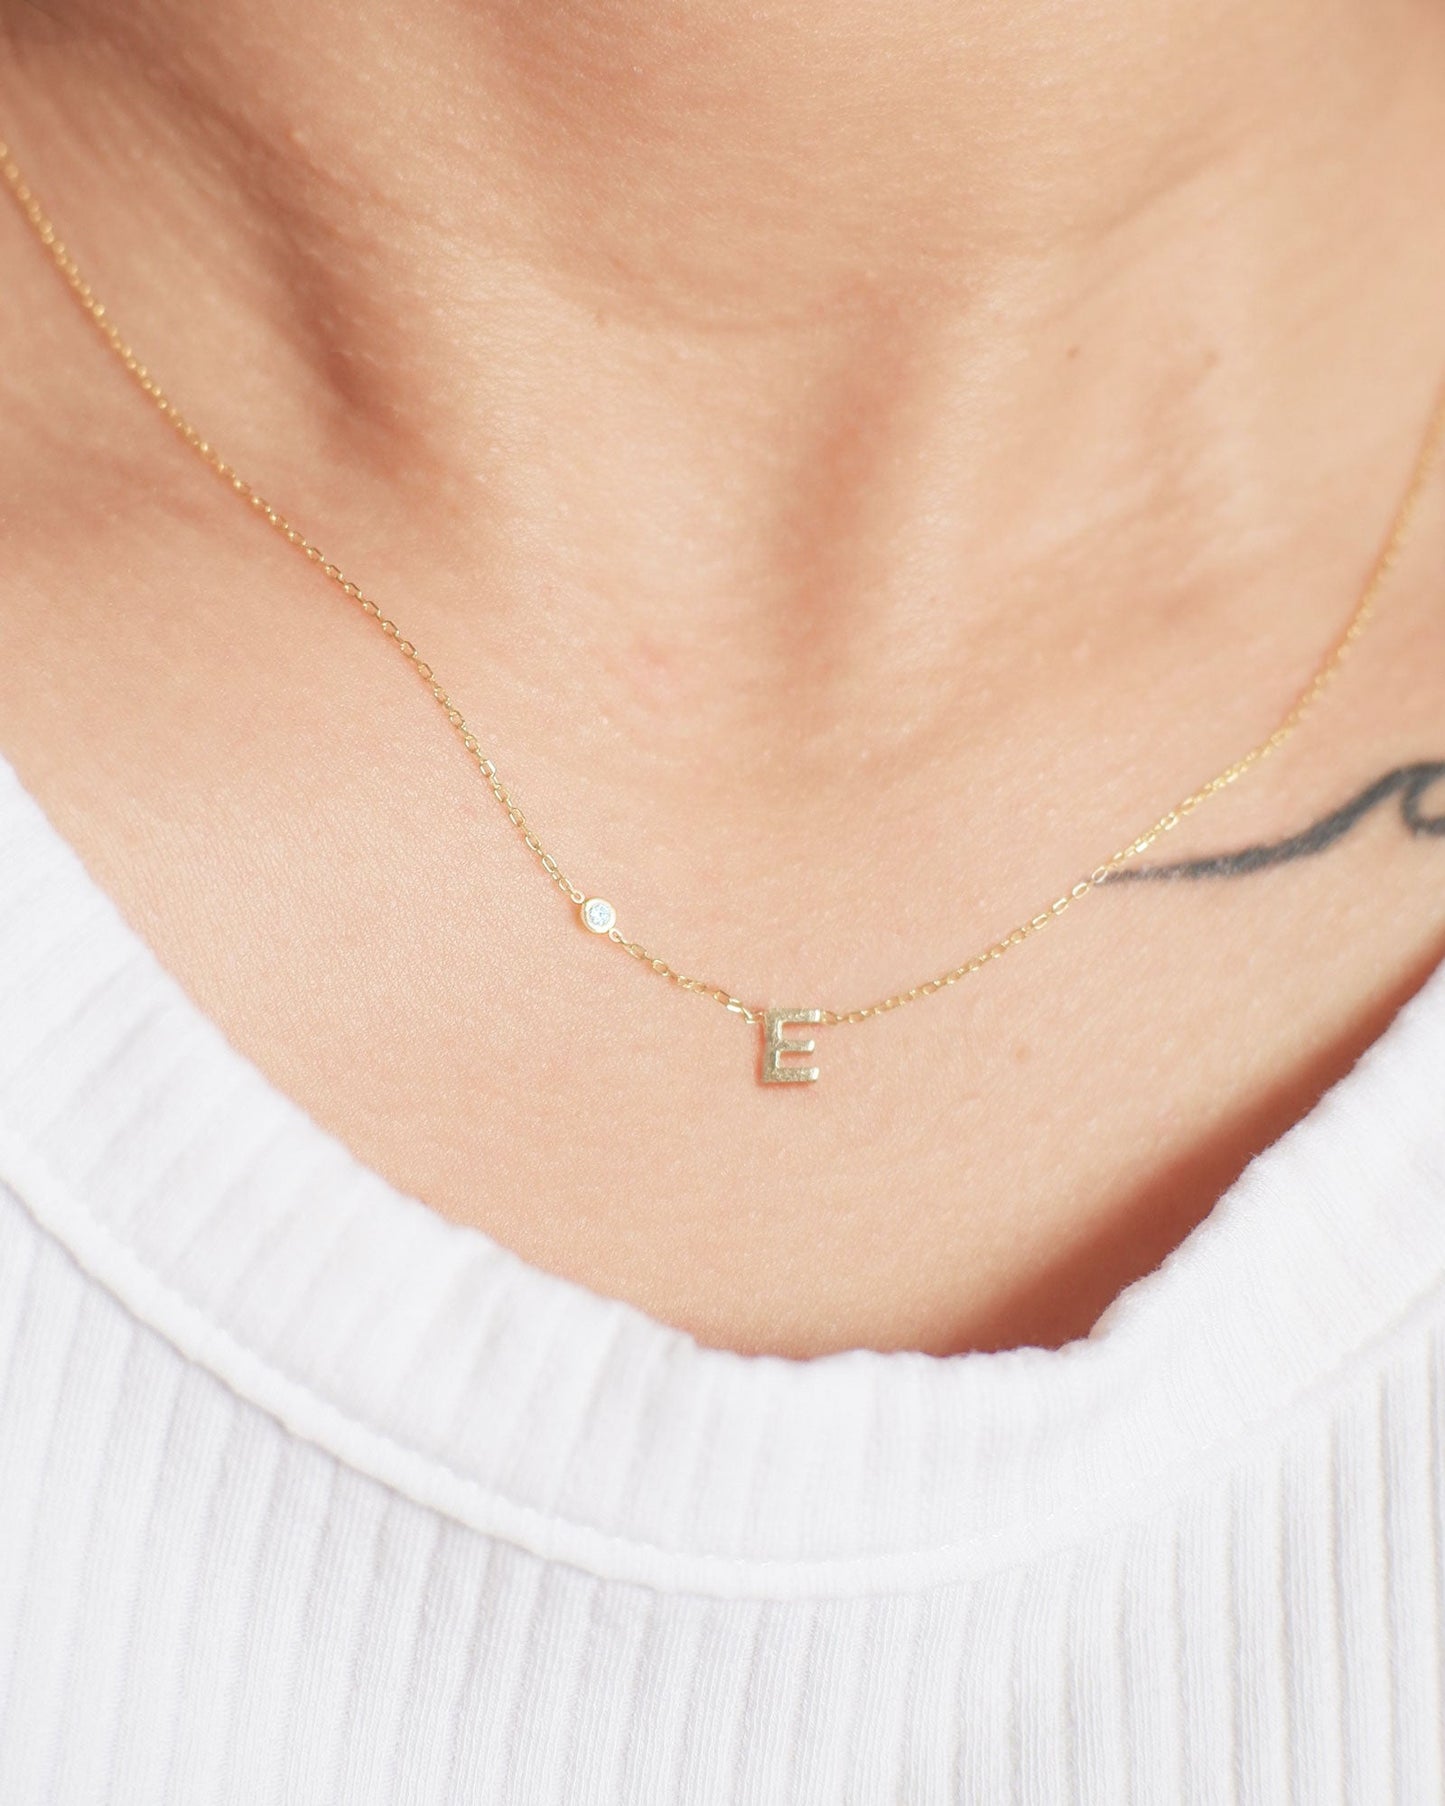 The Birthstone Initial Necklace in Solid Gold